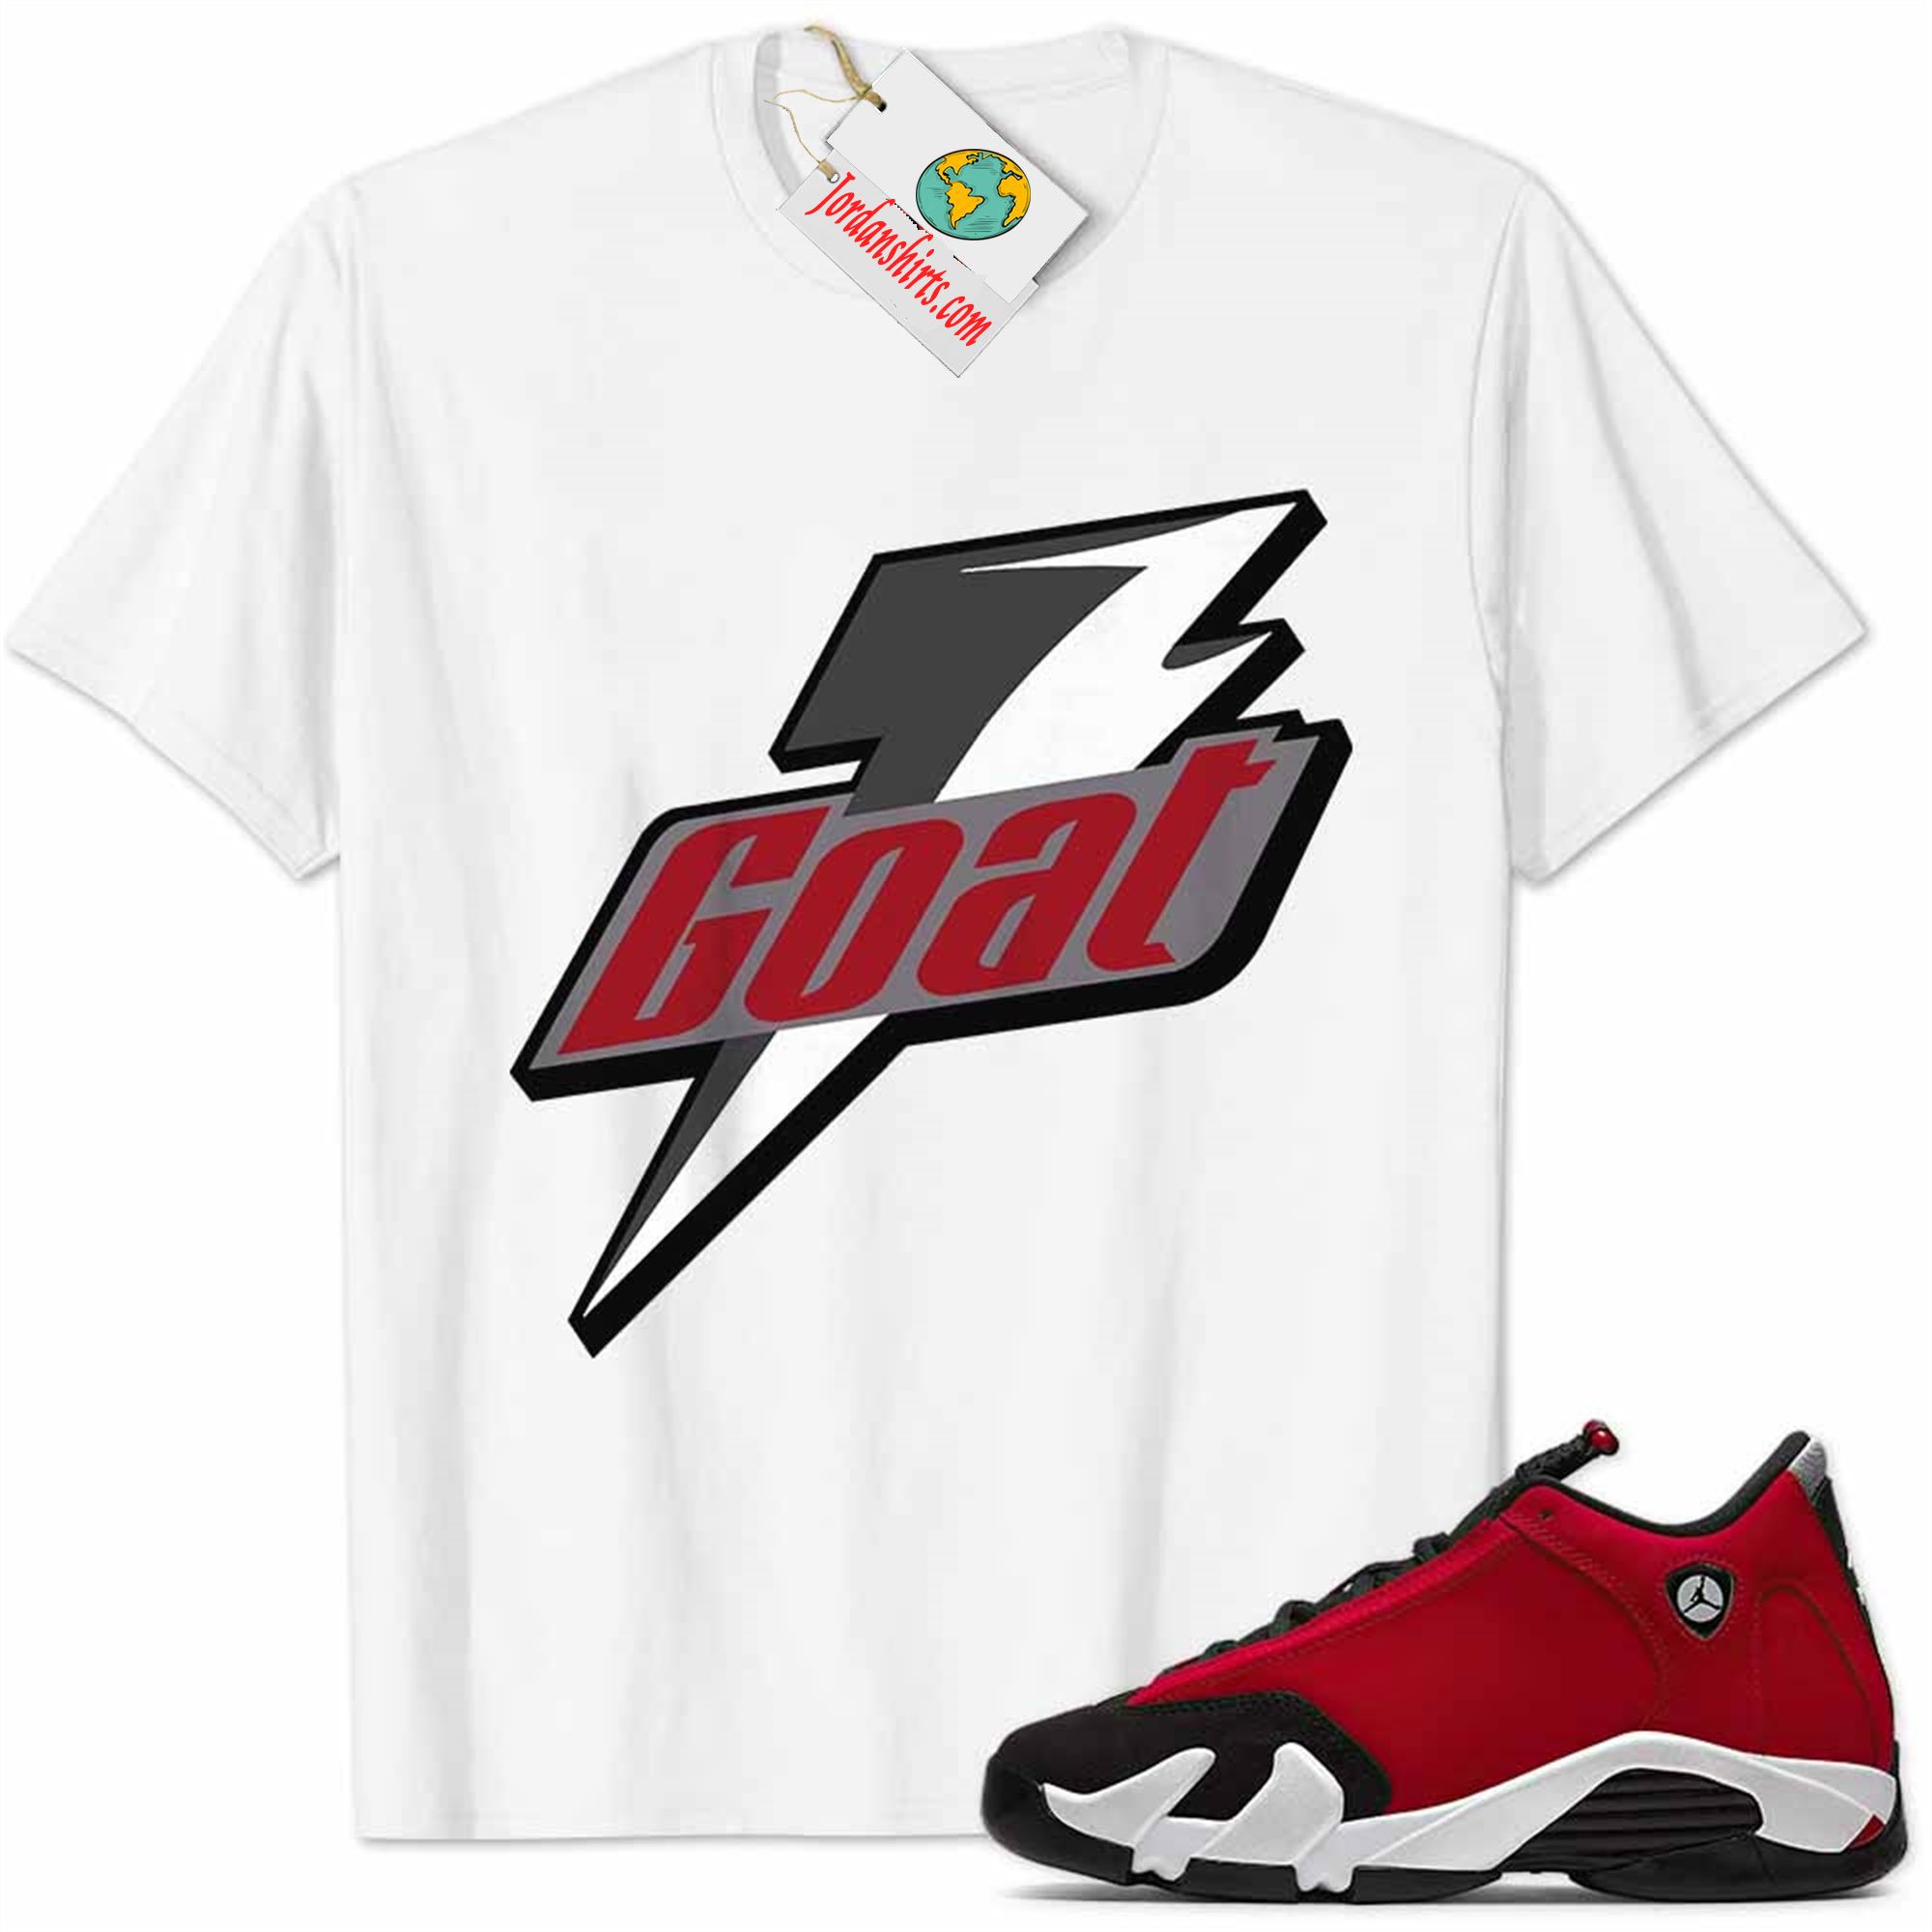 Jordan 14 Shirt, Gym Red 14s Shirt Goat Greatest Of All Time White Plus Size Up To 5xl